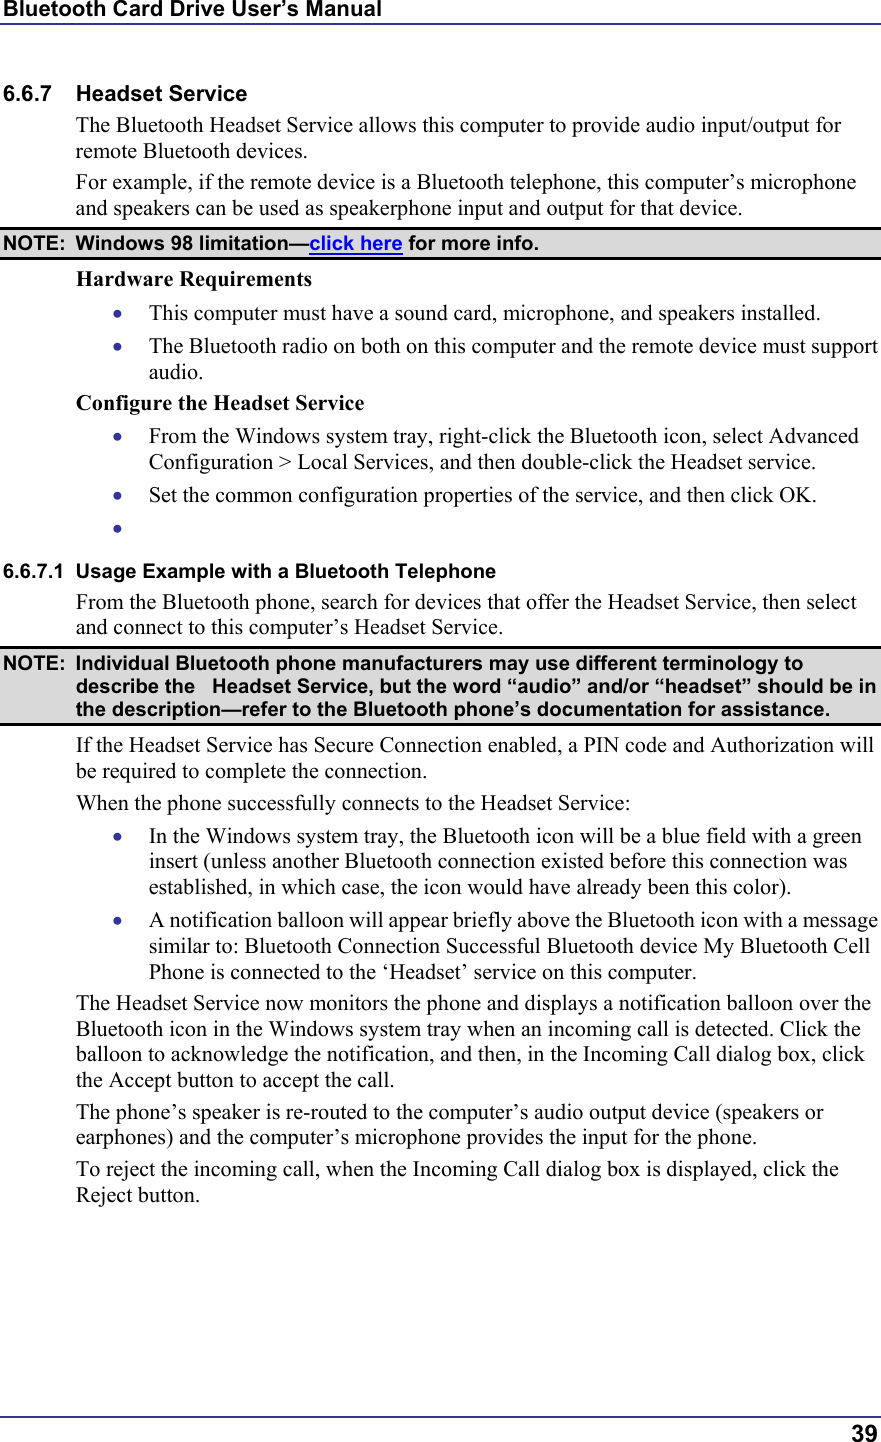 Bluetooth Card Drive User’s Manual  39 6.6.7 Headset Service The Bluetooth Headset Service allows this computer to provide audio input/output for remote Bluetooth devices. For example, if the remote device is a Bluetooth telephone, this computer’s microphone and speakers can be used as speakerphone input and output for that device. NOTE: Windows 98 limitation—click here for more info. Hardware Requirements •  This computer must have a sound card, microphone, and speakers installed. •  The Bluetooth radio on both on this computer and the remote device must support audio. Configure the Headset Service •  From the Windows system tray, right-click the Bluetooth icon, select Advanced Configuration &gt; Local Services, and then double-click the Headset service. •  Set the common configuration properties of the service, and then click OK. •   6.6.7.1  Usage Example with a Bluetooth Telephone From the Bluetooth phone, search for devices that offer the Headset Service, then select and connect to this computer’s Headset Service. NOTE:  Individual Bluetooth phone manufacturers may use different terminology to describe the   Headset Service, but the word “audio” and/or “headset” should be in the description—refer to the Bluetooth phone’s documentation for assistance. If the Headset Service has Secure Connection enabled, a PIN code and Authorization will be required to complete the connection. When the phone successfully connects to the Headset Service: •  In the Windows system tray, the Bluetooth icon will be a blue field with a green insert (unless another Bluetooth connection existed before this connection was established, in which case, the icon would have already been this color). •  A notification balloon will appear briefly above the Bluetooth icon with a message similar to: Bluetooth Connection Successful Bluetooth device My Bluetooth Cell Phone is connected to the ‘Headset’ service on this computer. The Headset Service now monitors the phone and displays a notification balloon over the Bluetooth icon in the Windows system tray when an incoming call is detected. Click the balloon to acknowledge the notification, and then, in the Incoming Call dialog box, click the Accept button to accept the call. The phone’s speaker is re-routed to the computer’s audio output device (speakers or earphones) and the computer’s microphone provides the input for the phone. To reject the incoming call, when the Incoming Call dialog box is displayed, click the Reject button. 